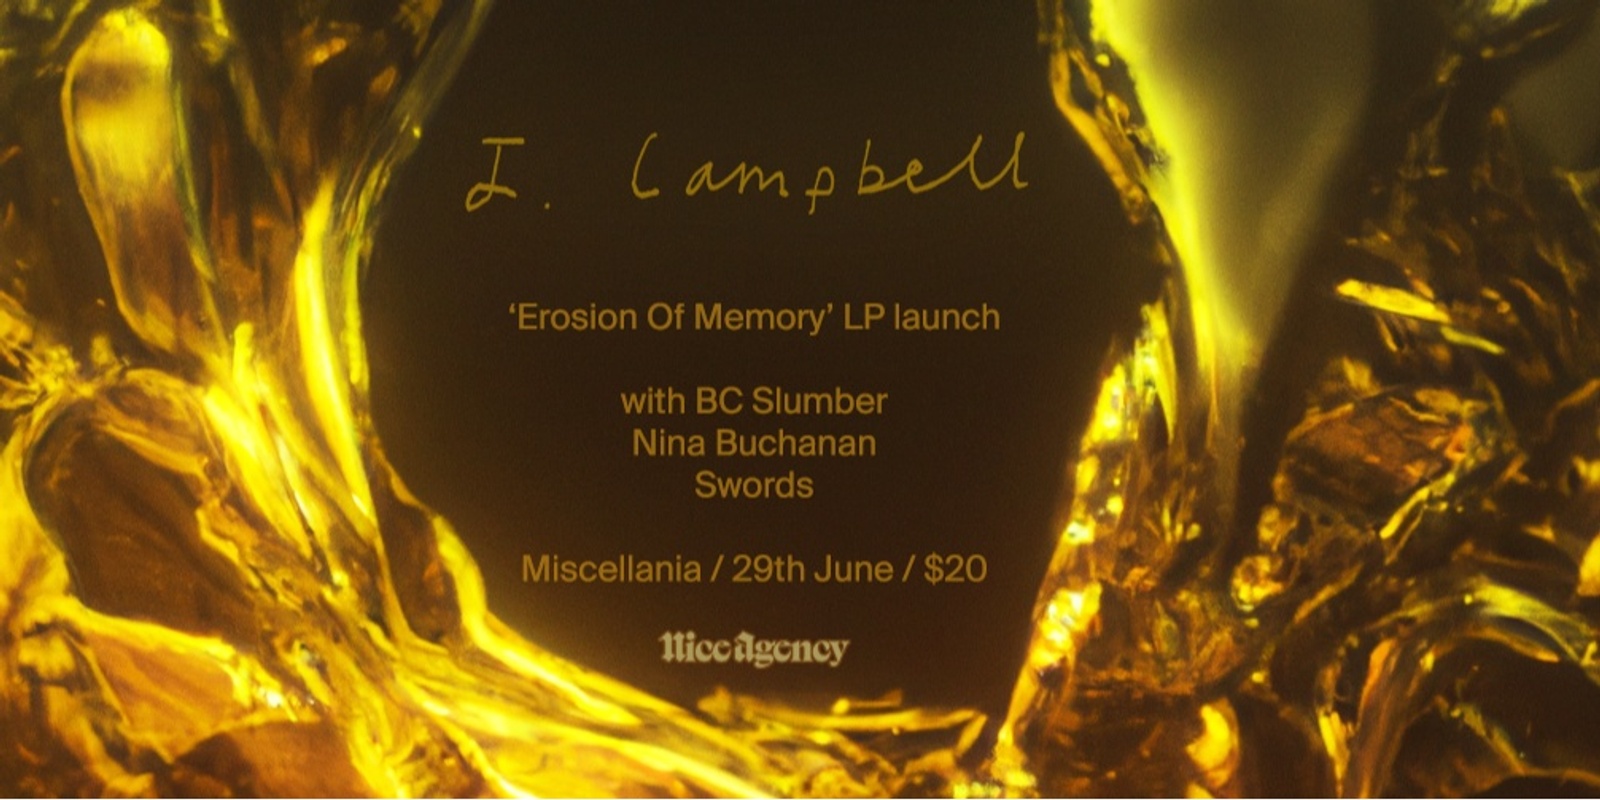 Banner image for J. Campbell 'Erosion Of Memory' album launch